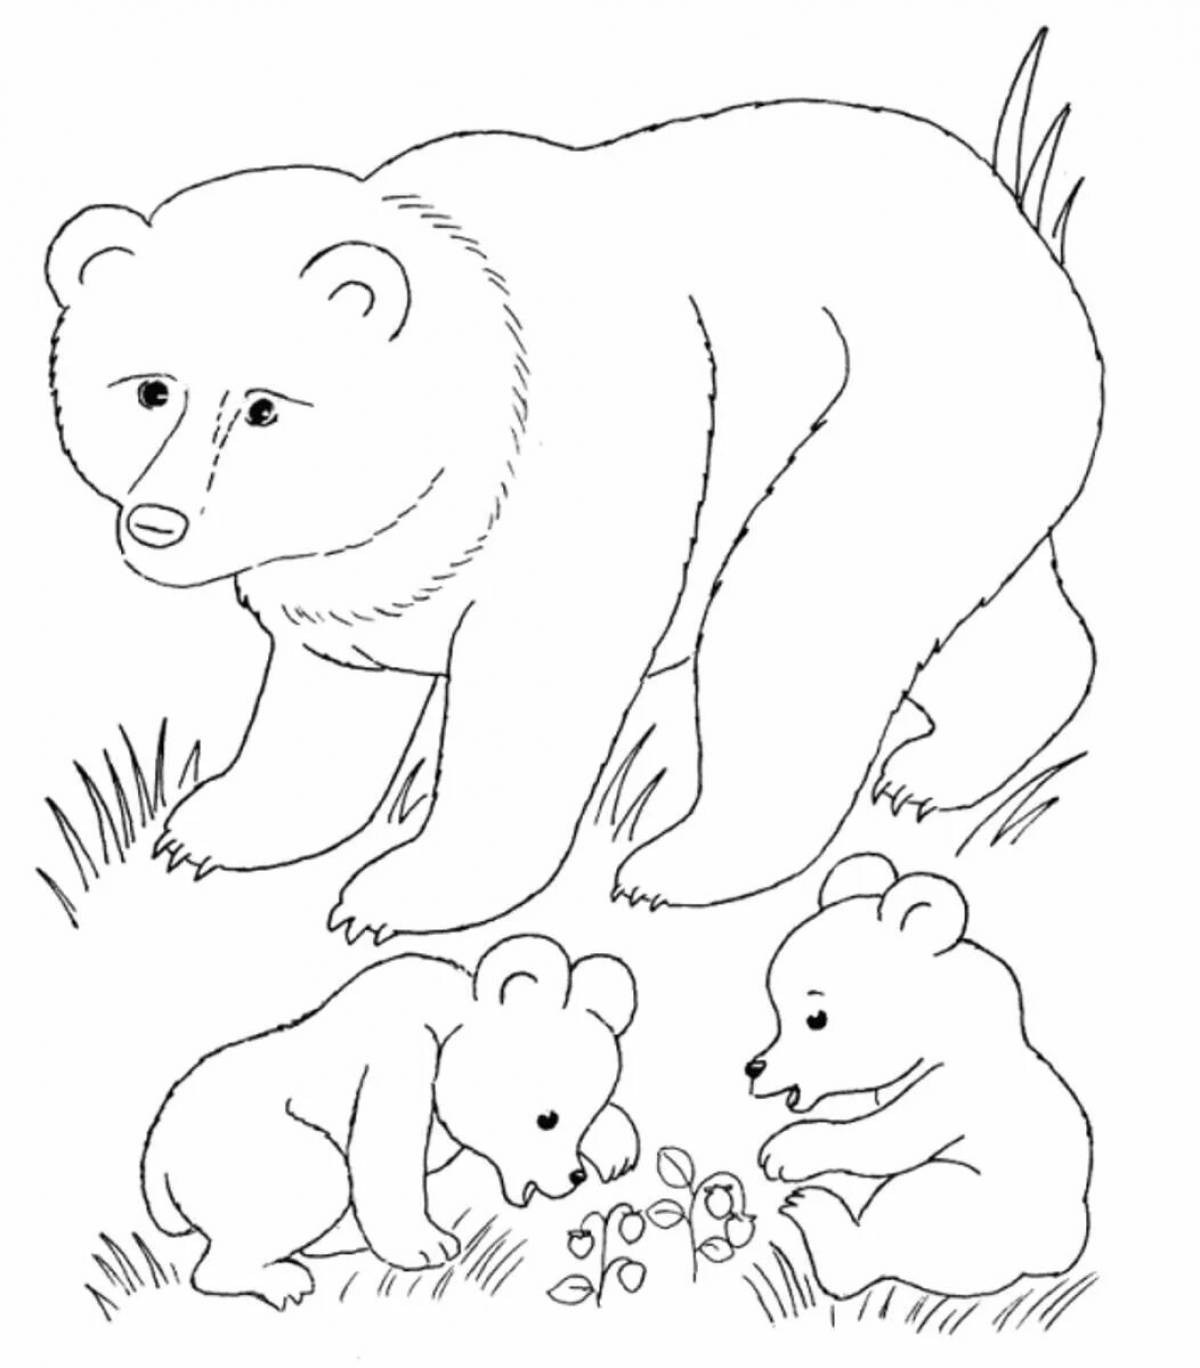 Colorful andar coloring page